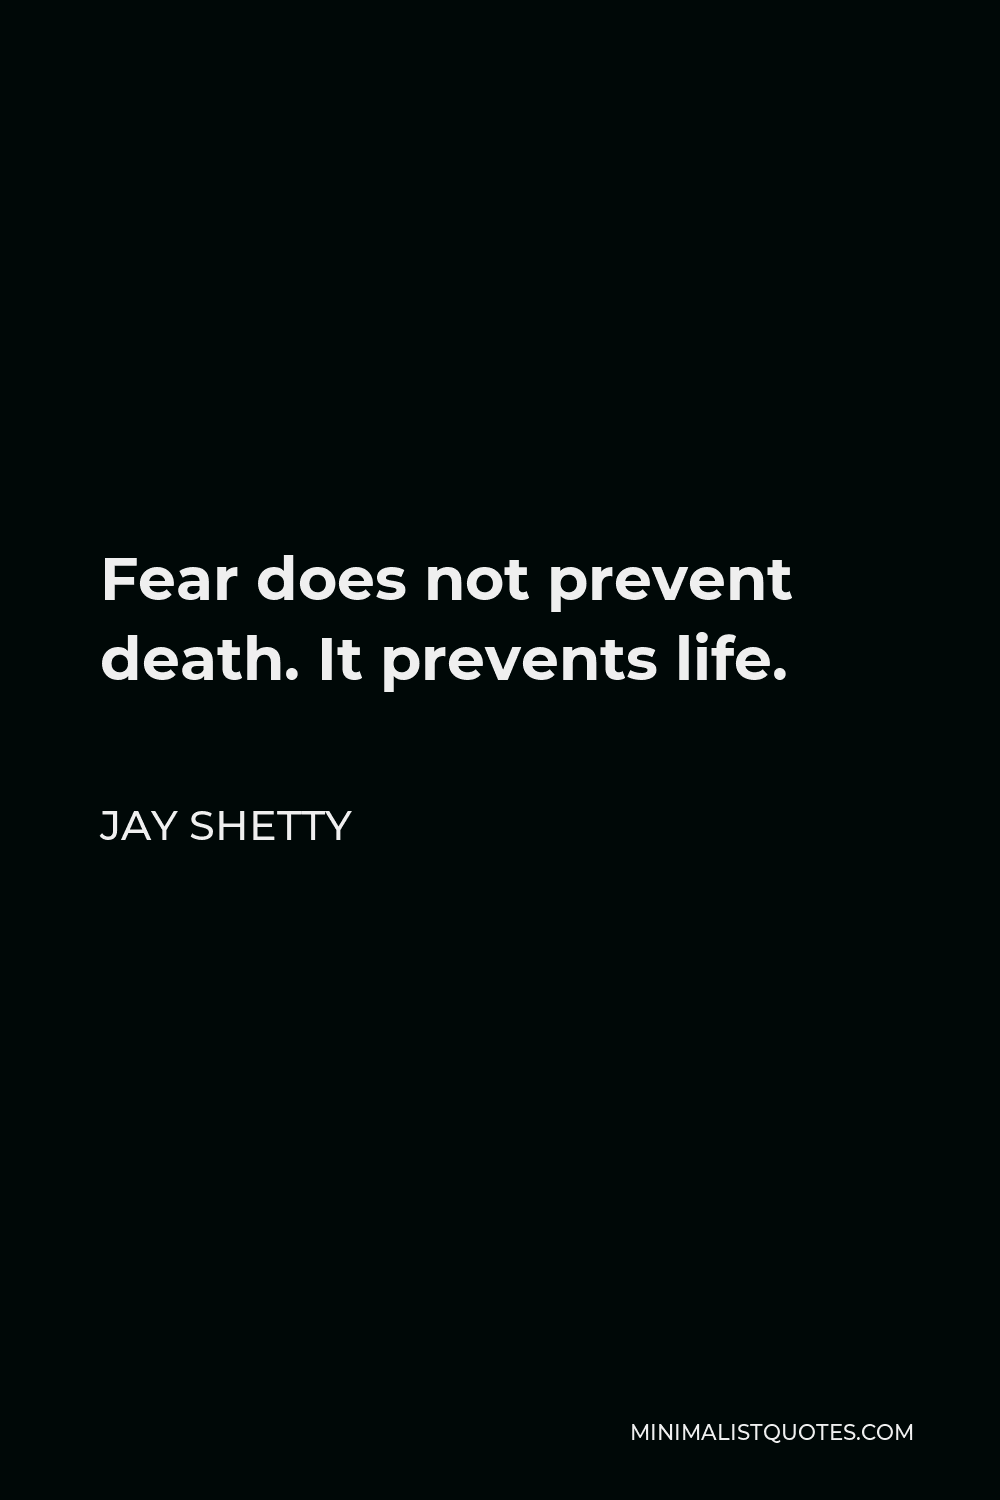 Jay Shetty Quote - Fear does not prevent death. It prevents life.